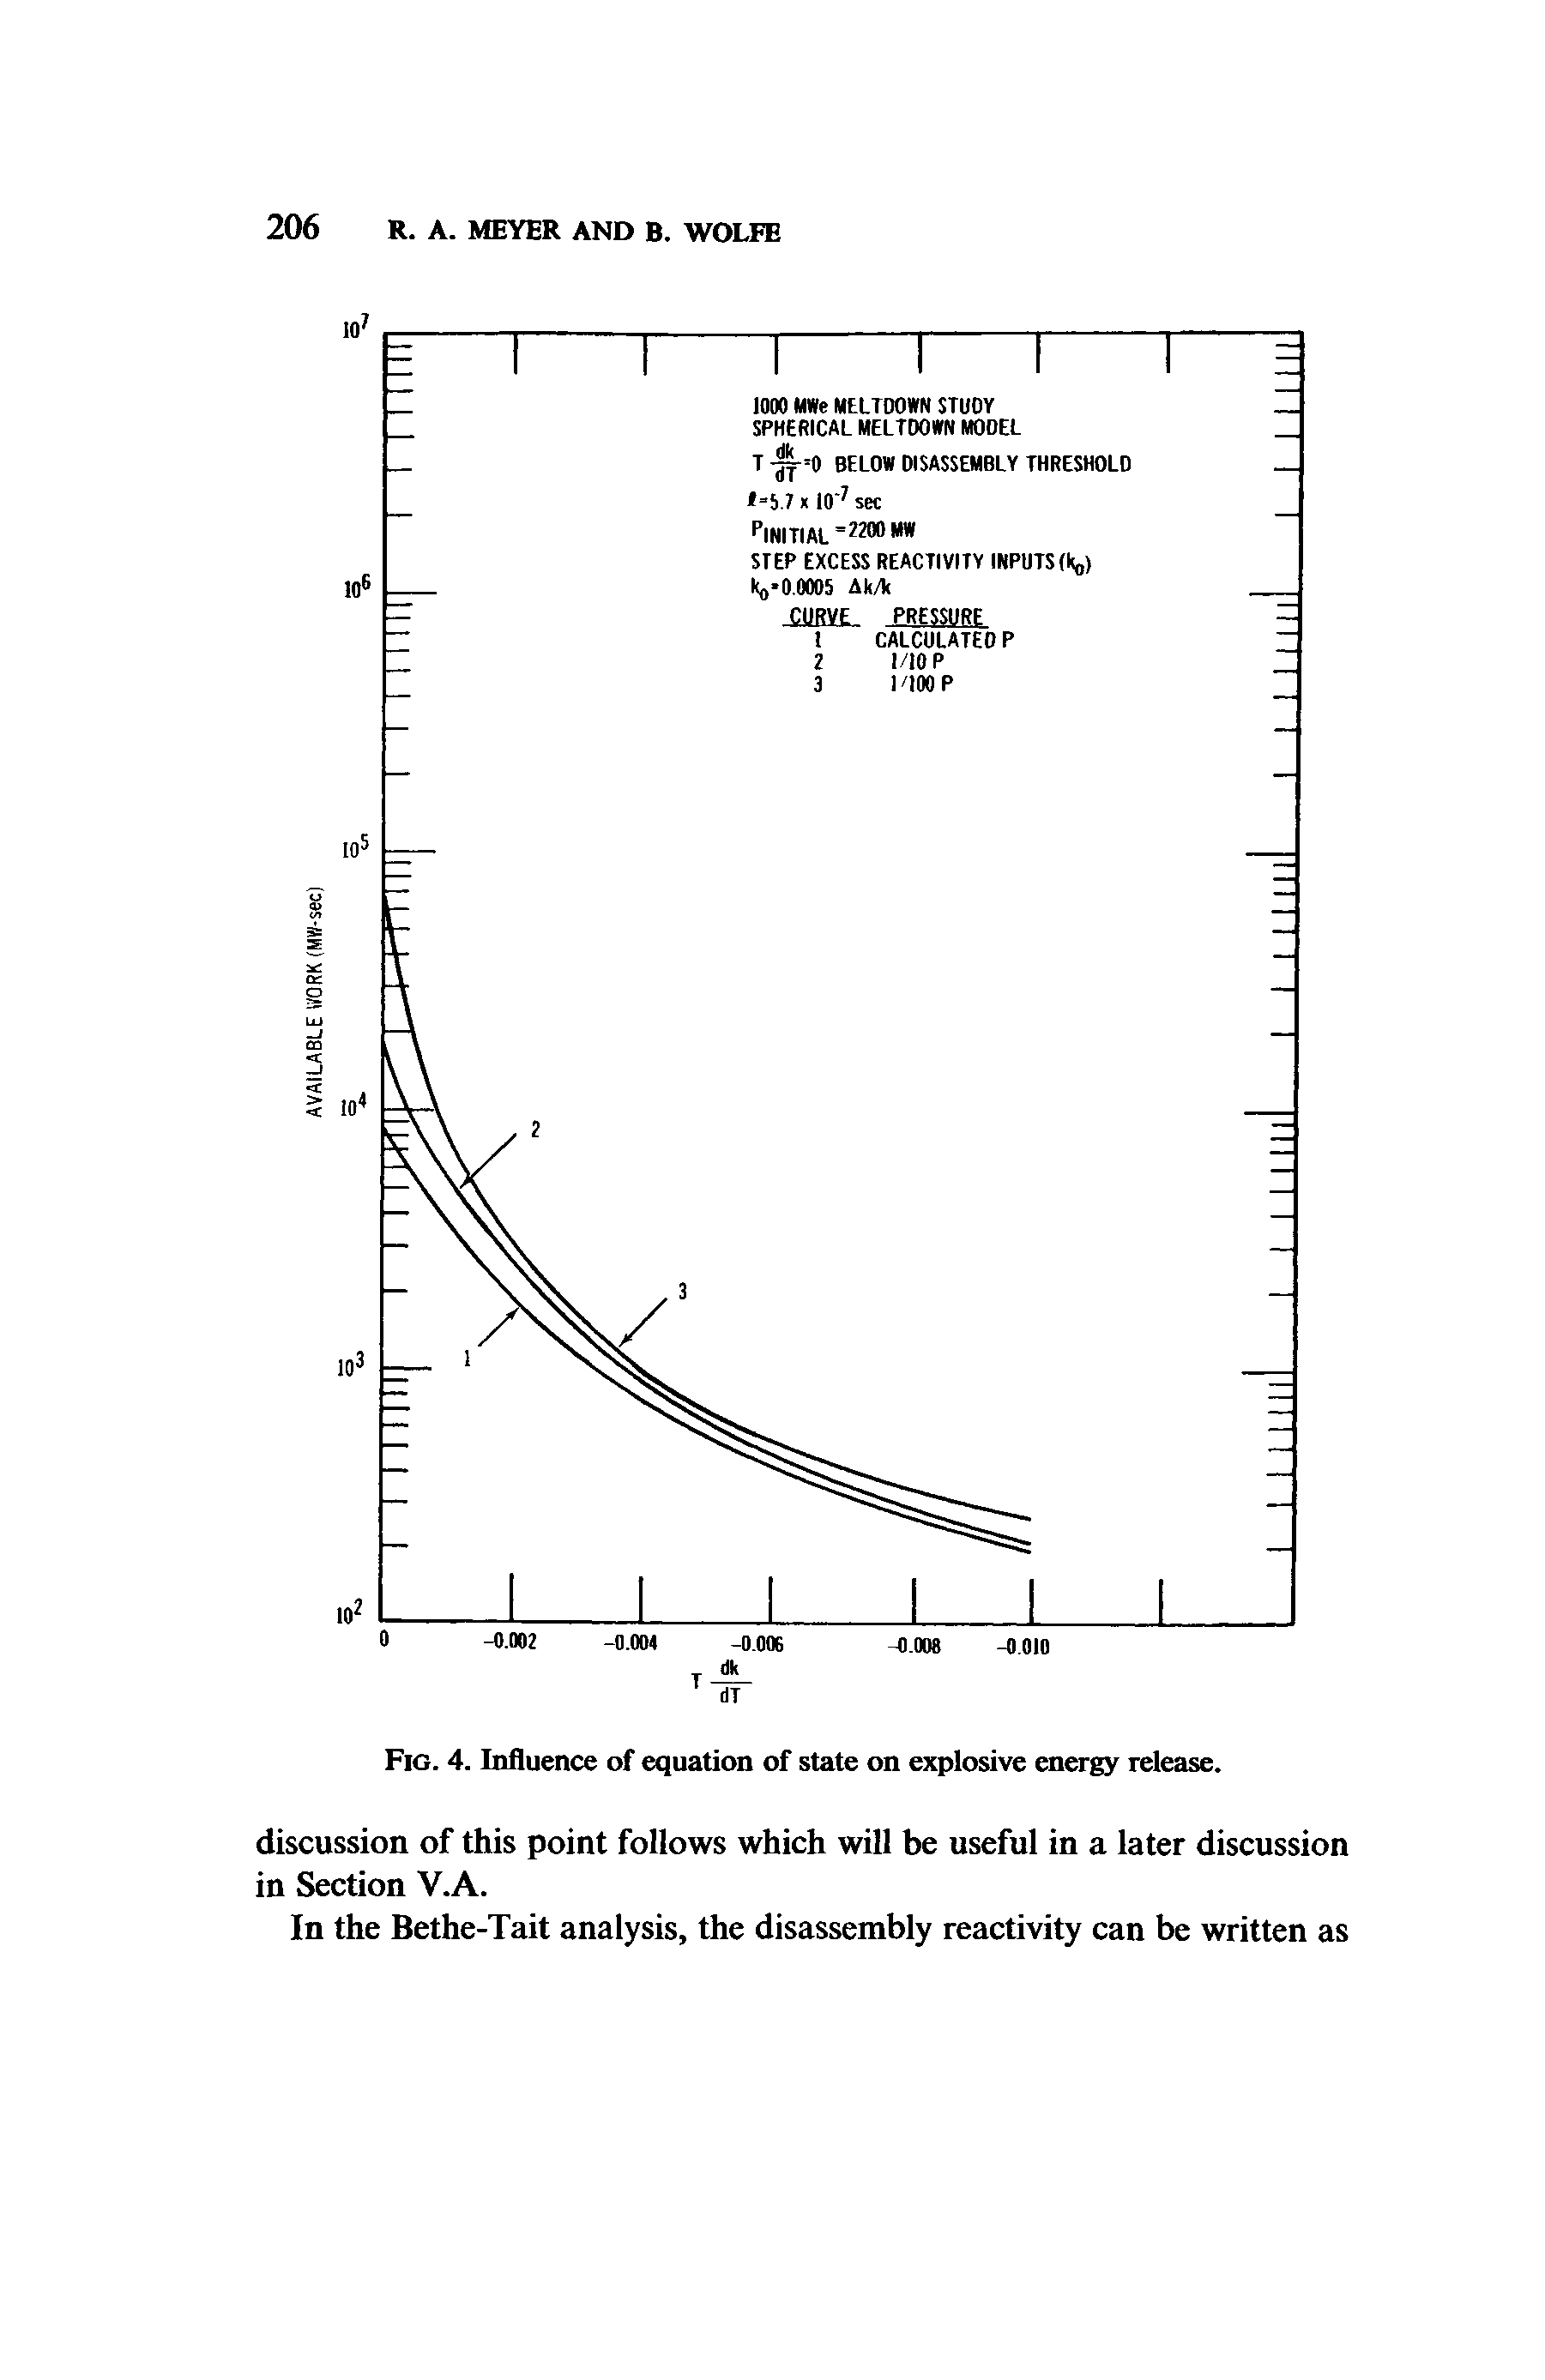 Fig. 4. Influence of equation of state on explosive energy release.